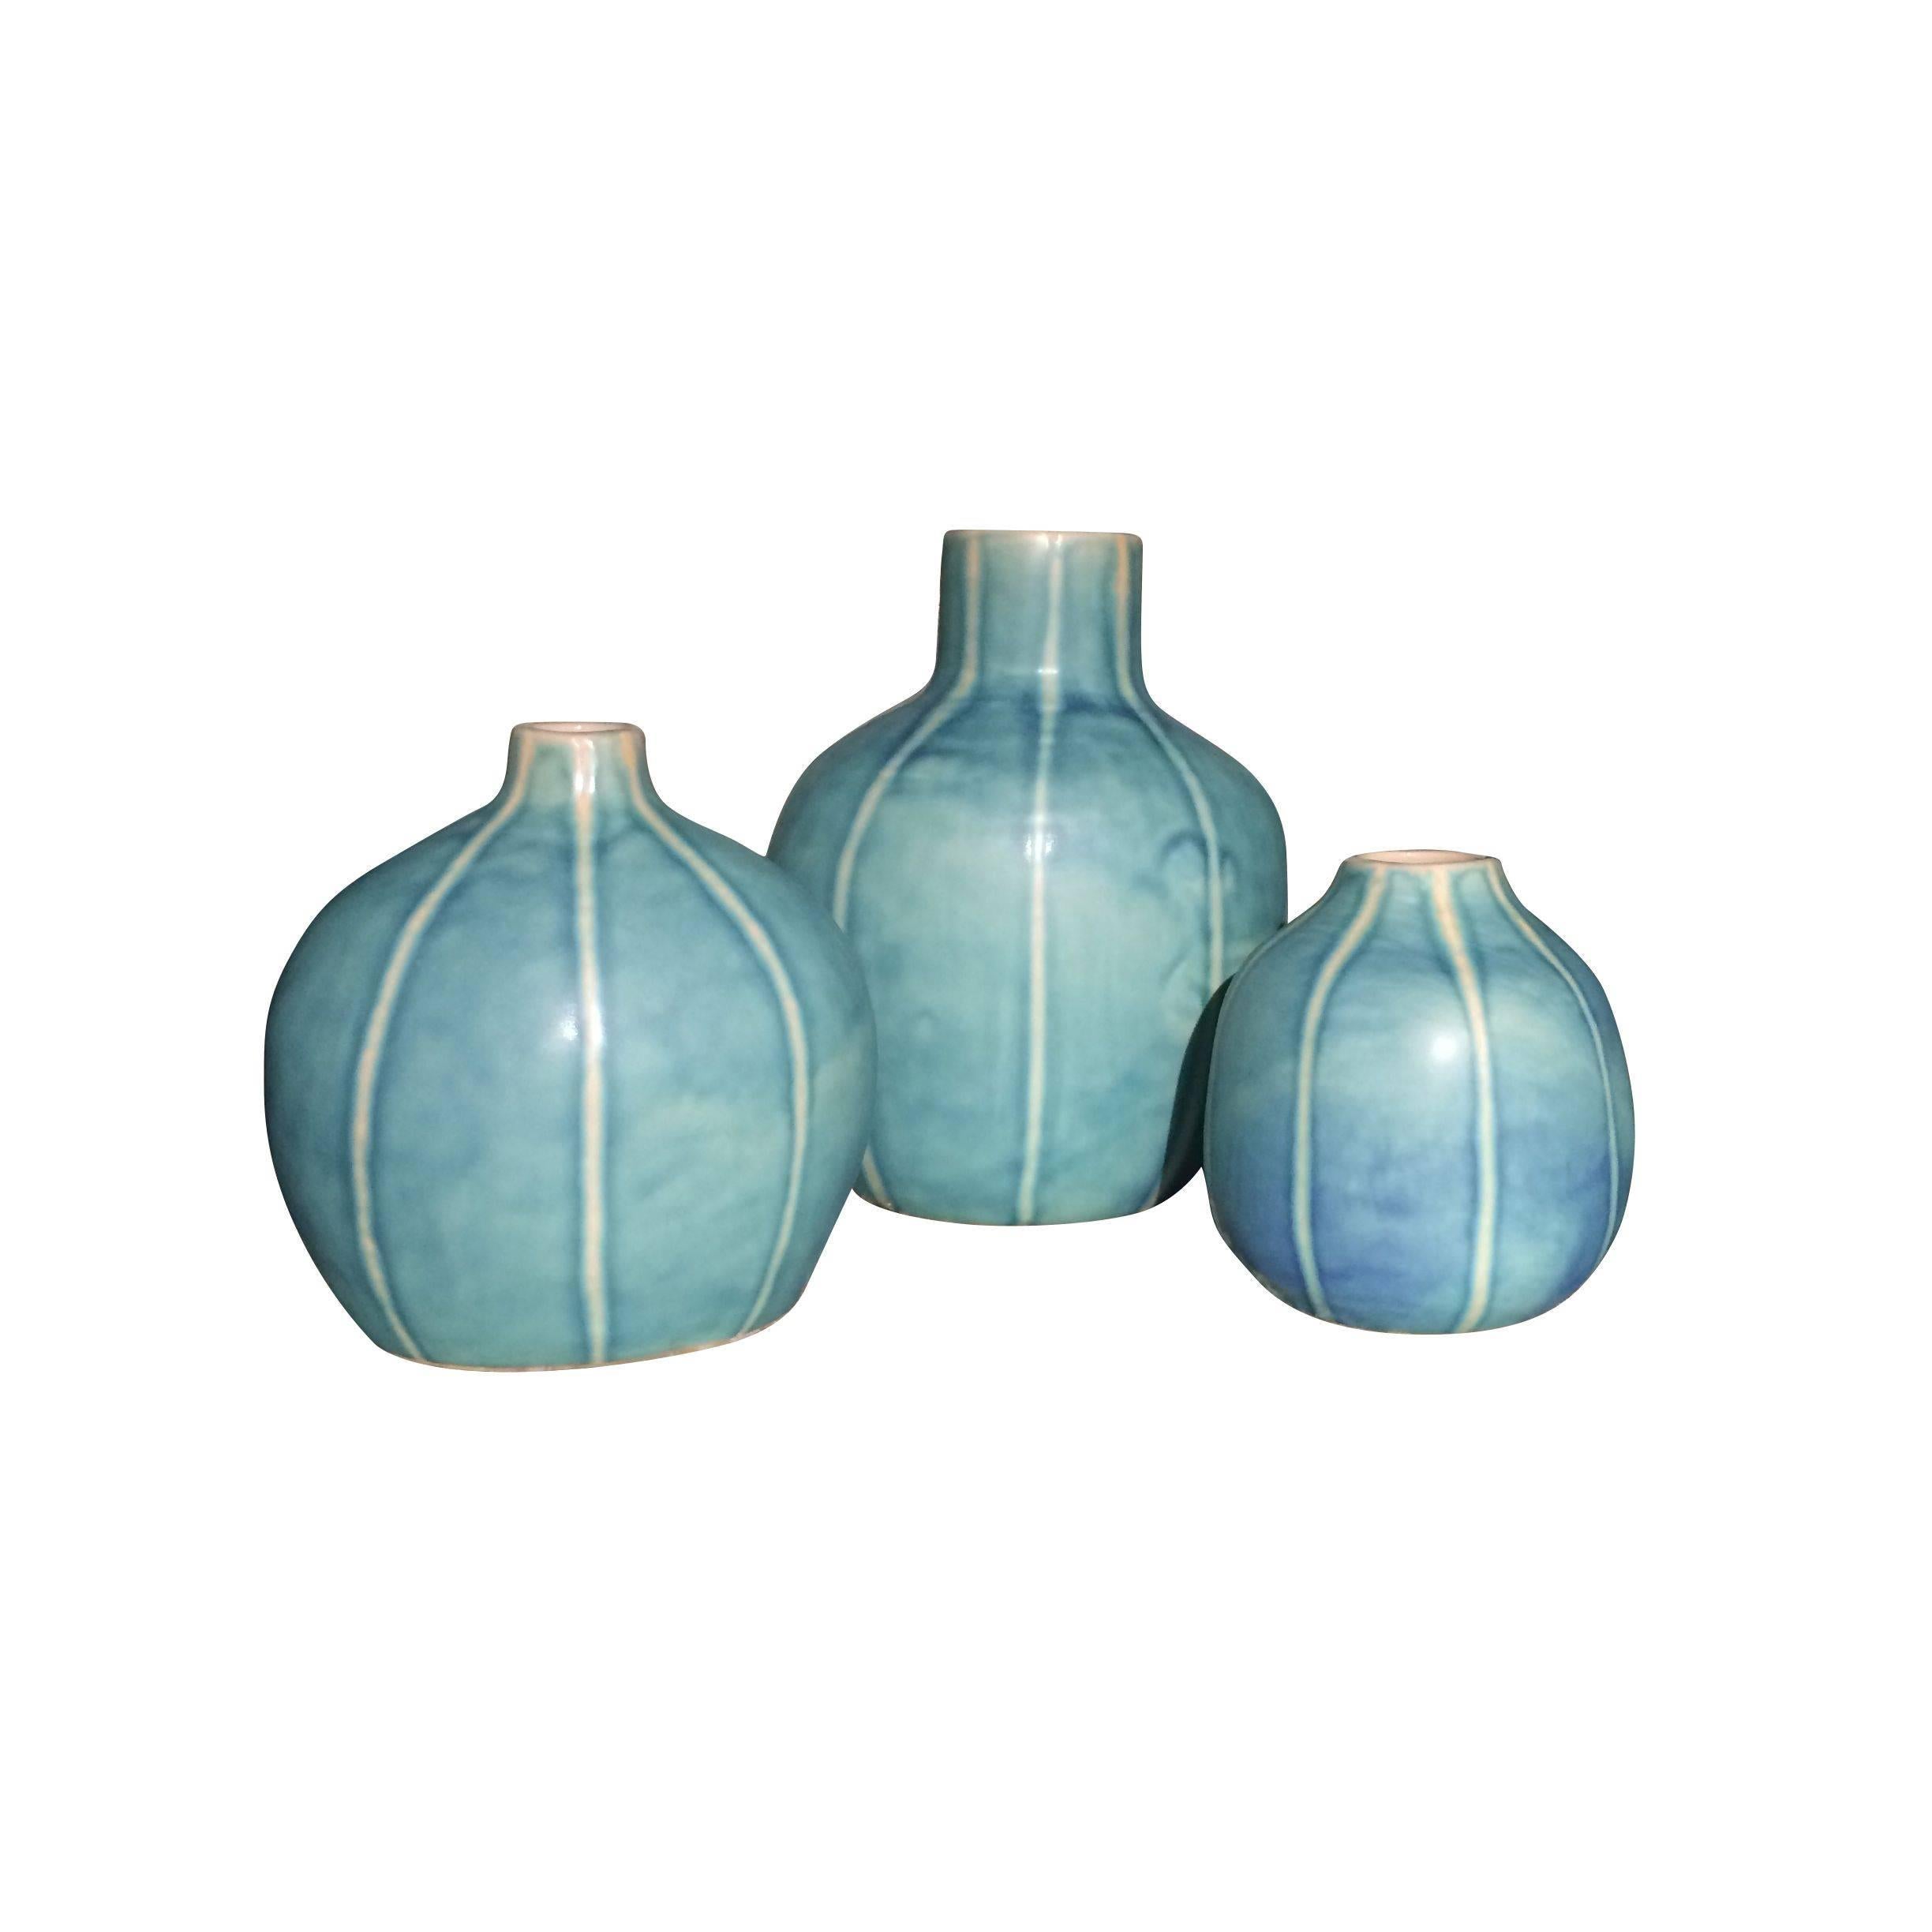 Larger melon shaped washed turquoise glazed stoneware vase.
Sits well with S4644 and S4645.
See image #2.
ARRIVING AUGUST
            